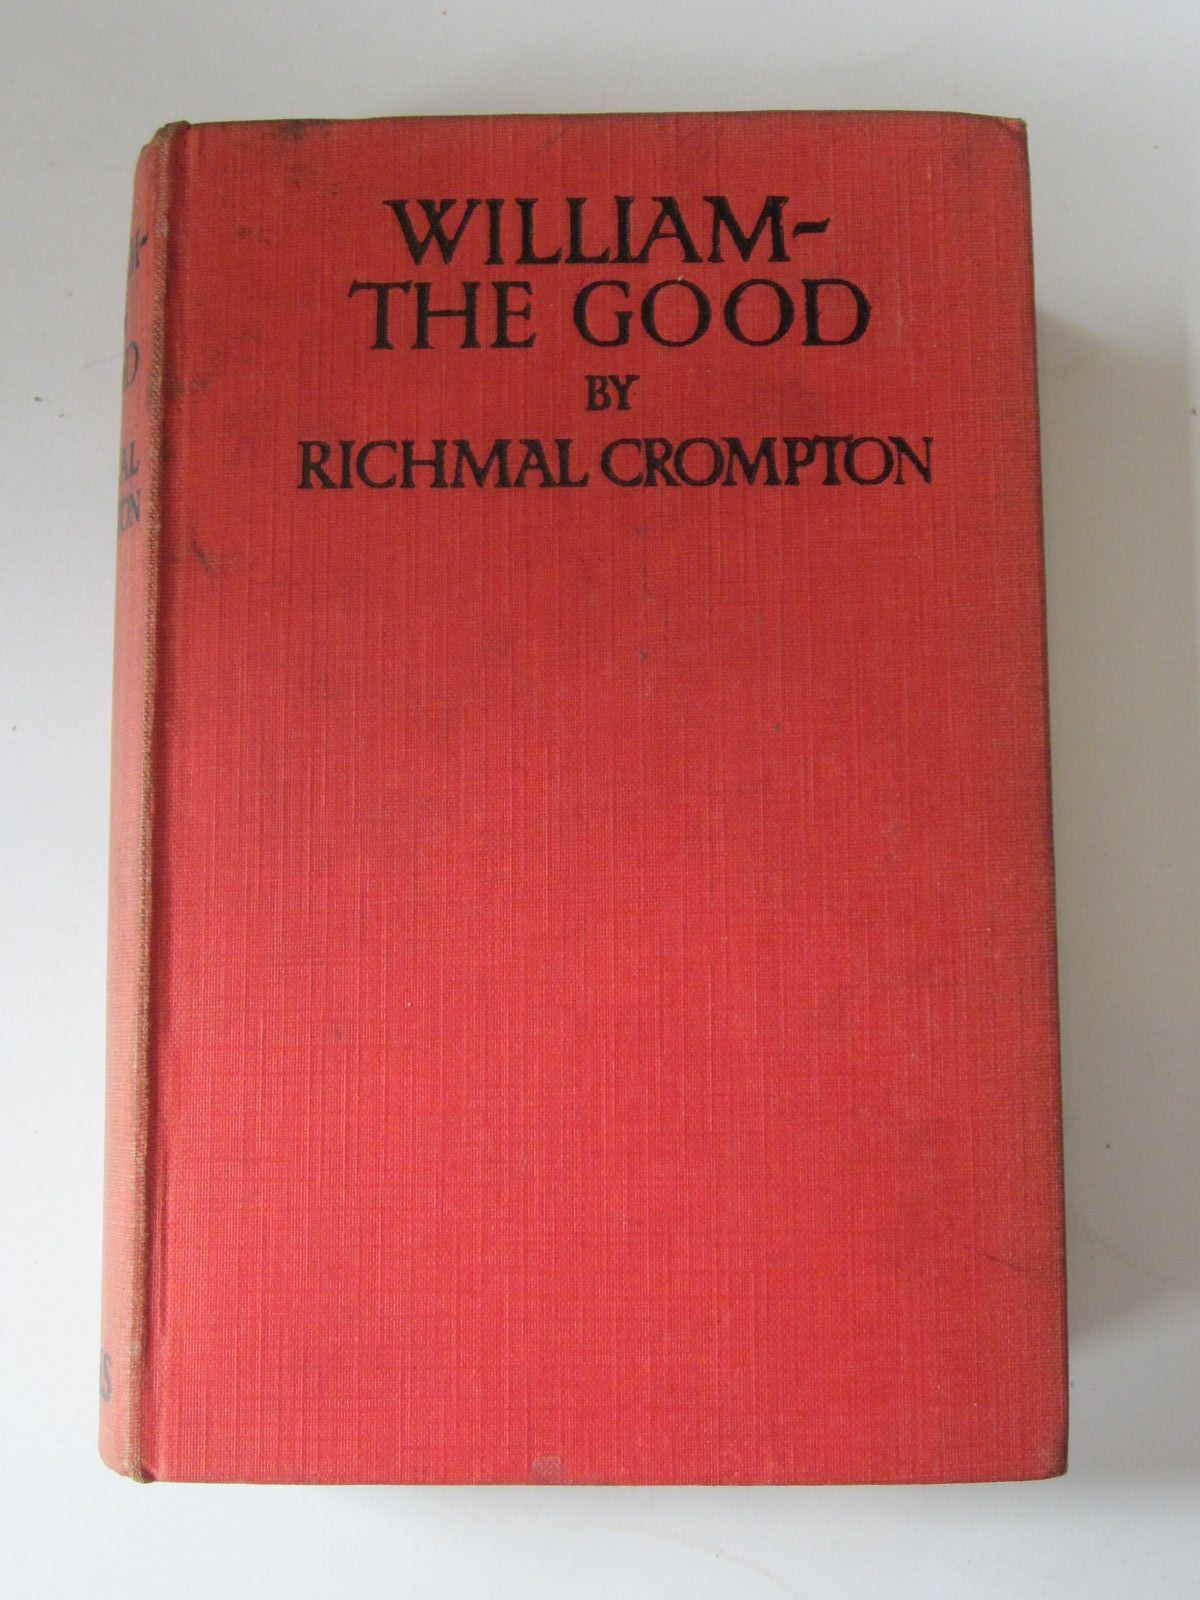 Photo of WILLIAM THE GOOD written by Crompton, Richmal illustrated by Henry, Thomas published by George Newnes Limited (STOCK CODE: 1308453)  for sale by Stella & Rose's Books